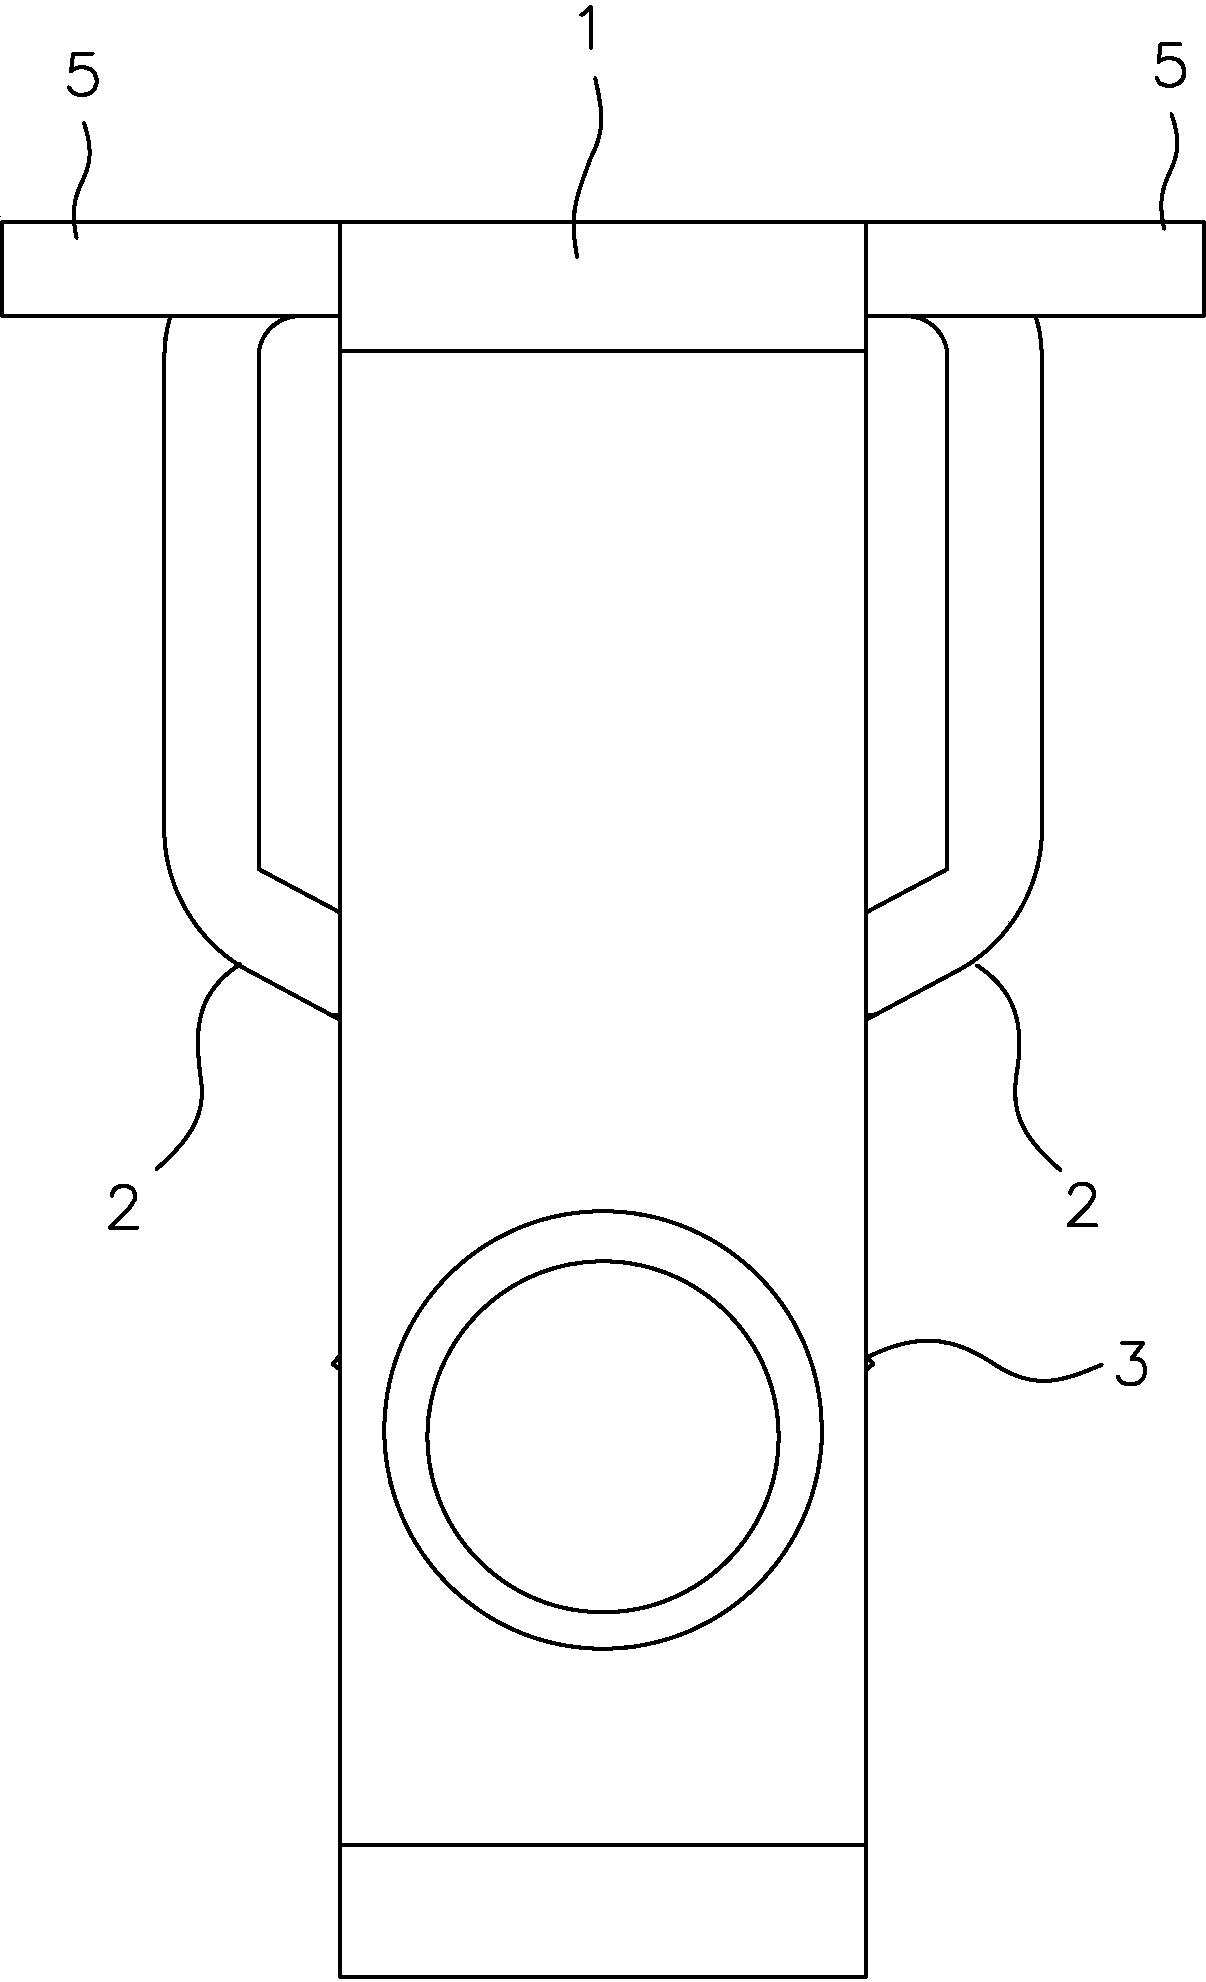 Electrode clamping piece and socket